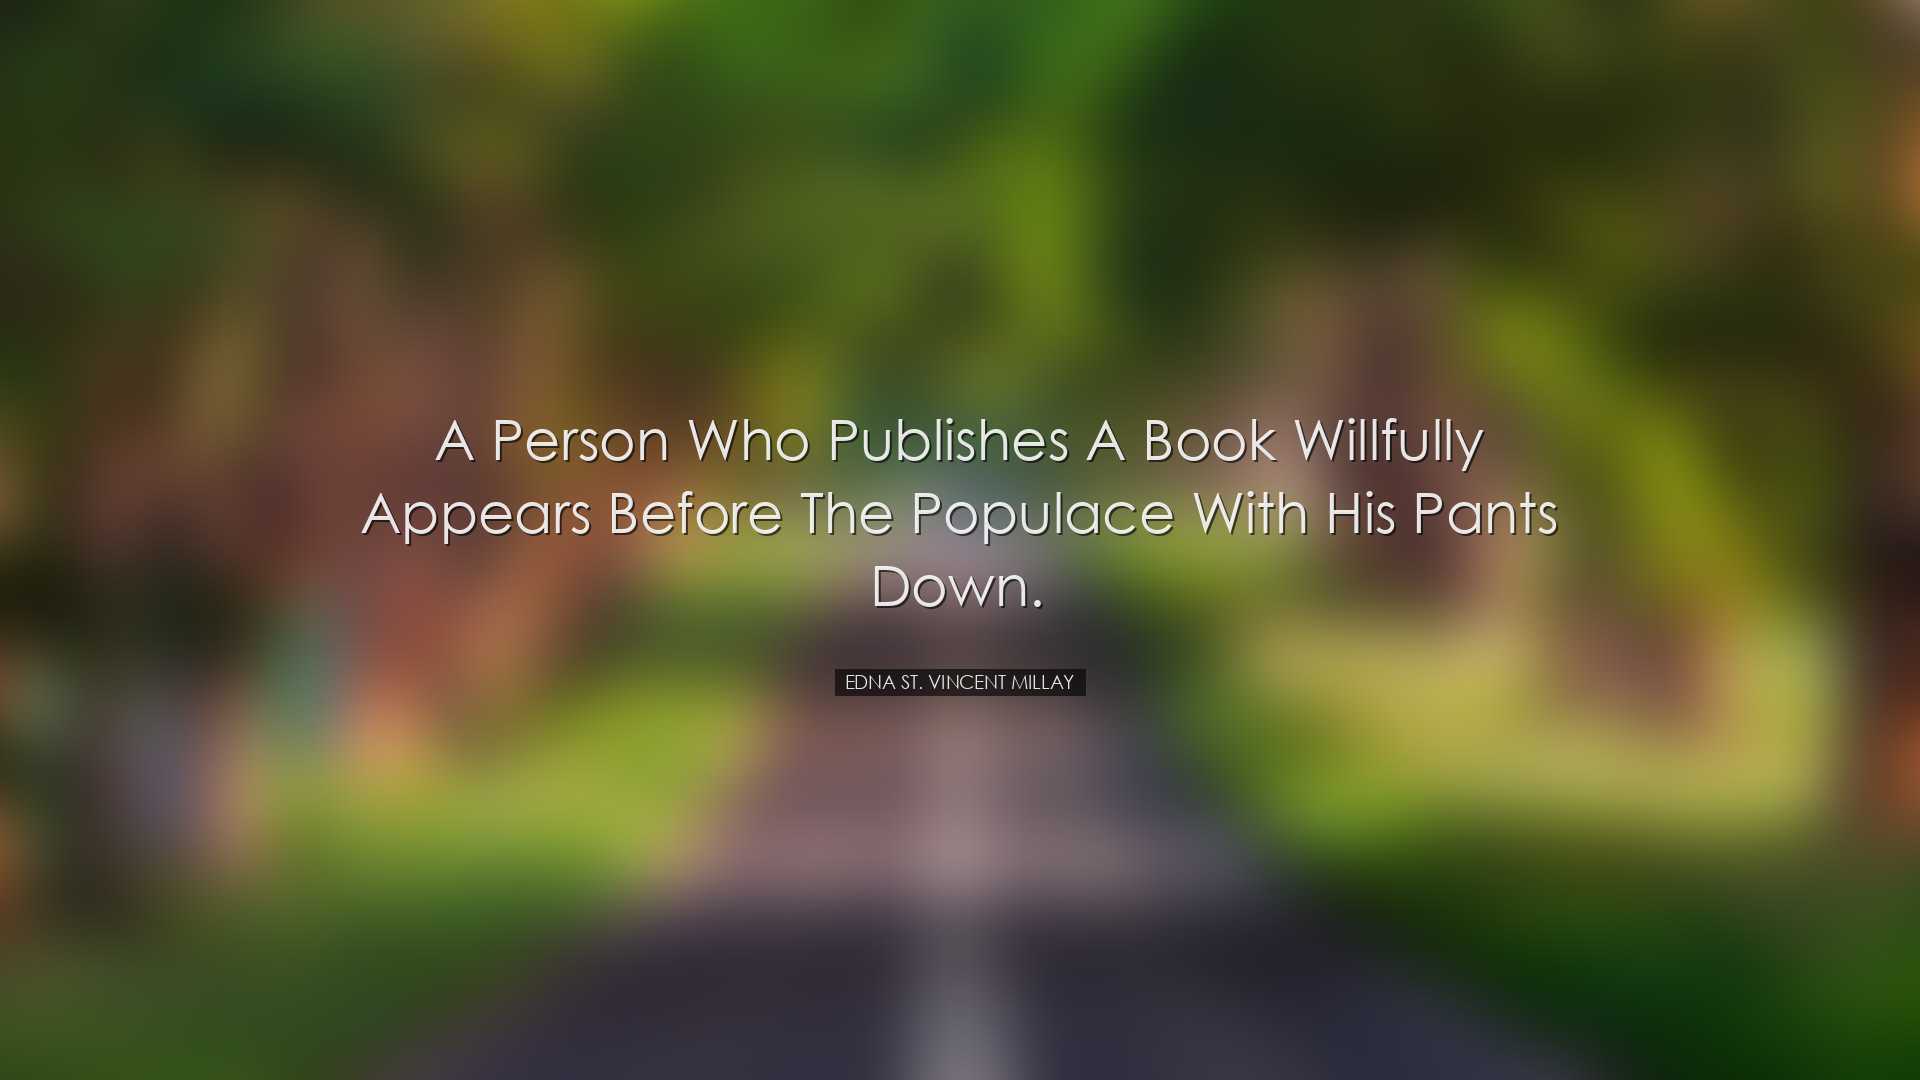 A person who publishes a book willfully appears before the populac